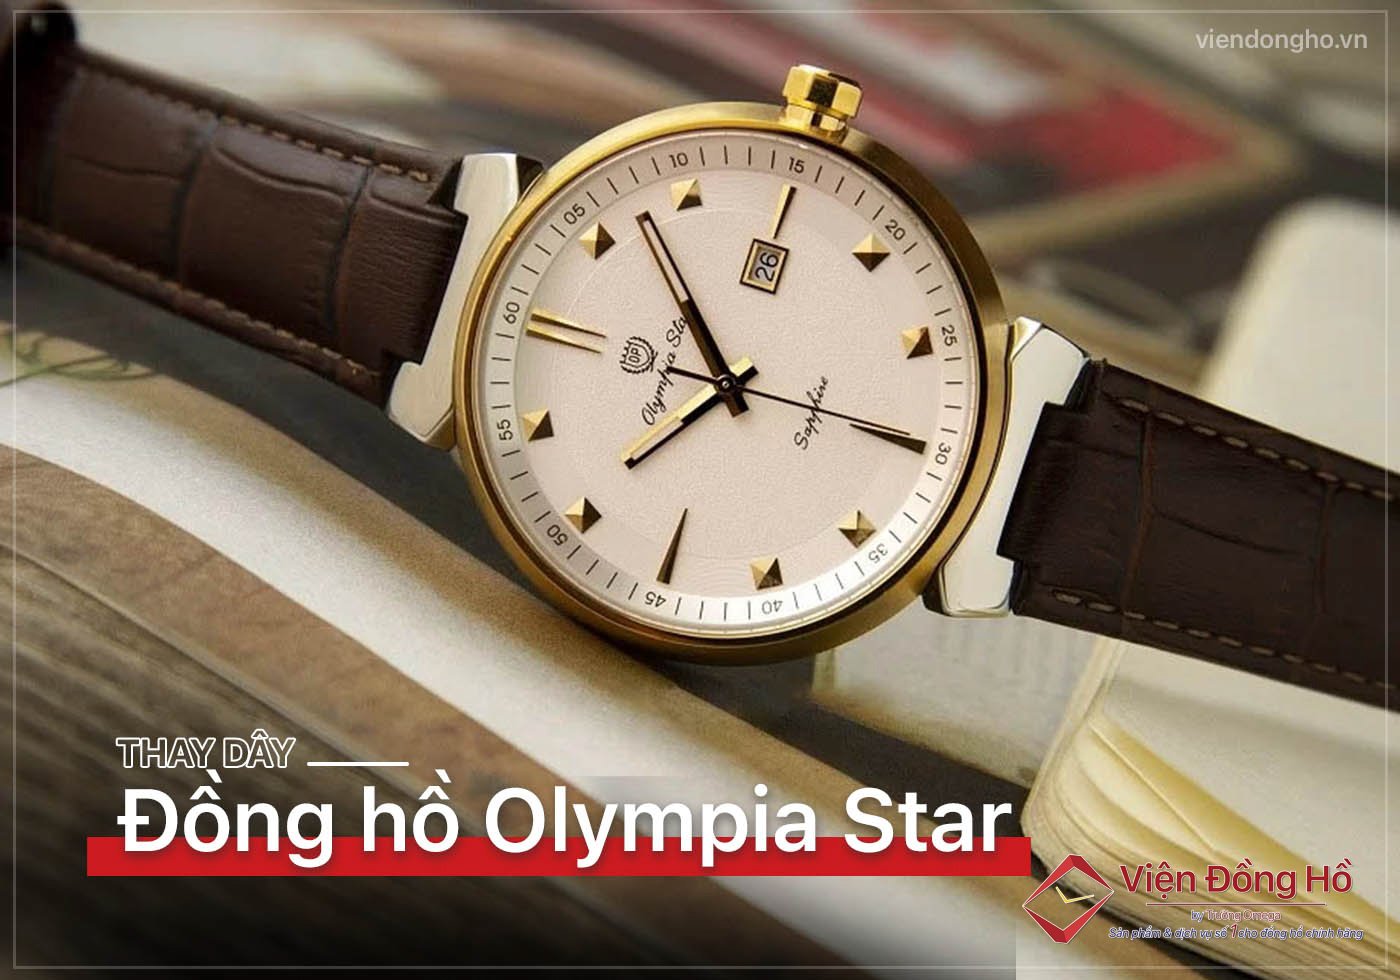 Thay day dong ho Olympia Star 5